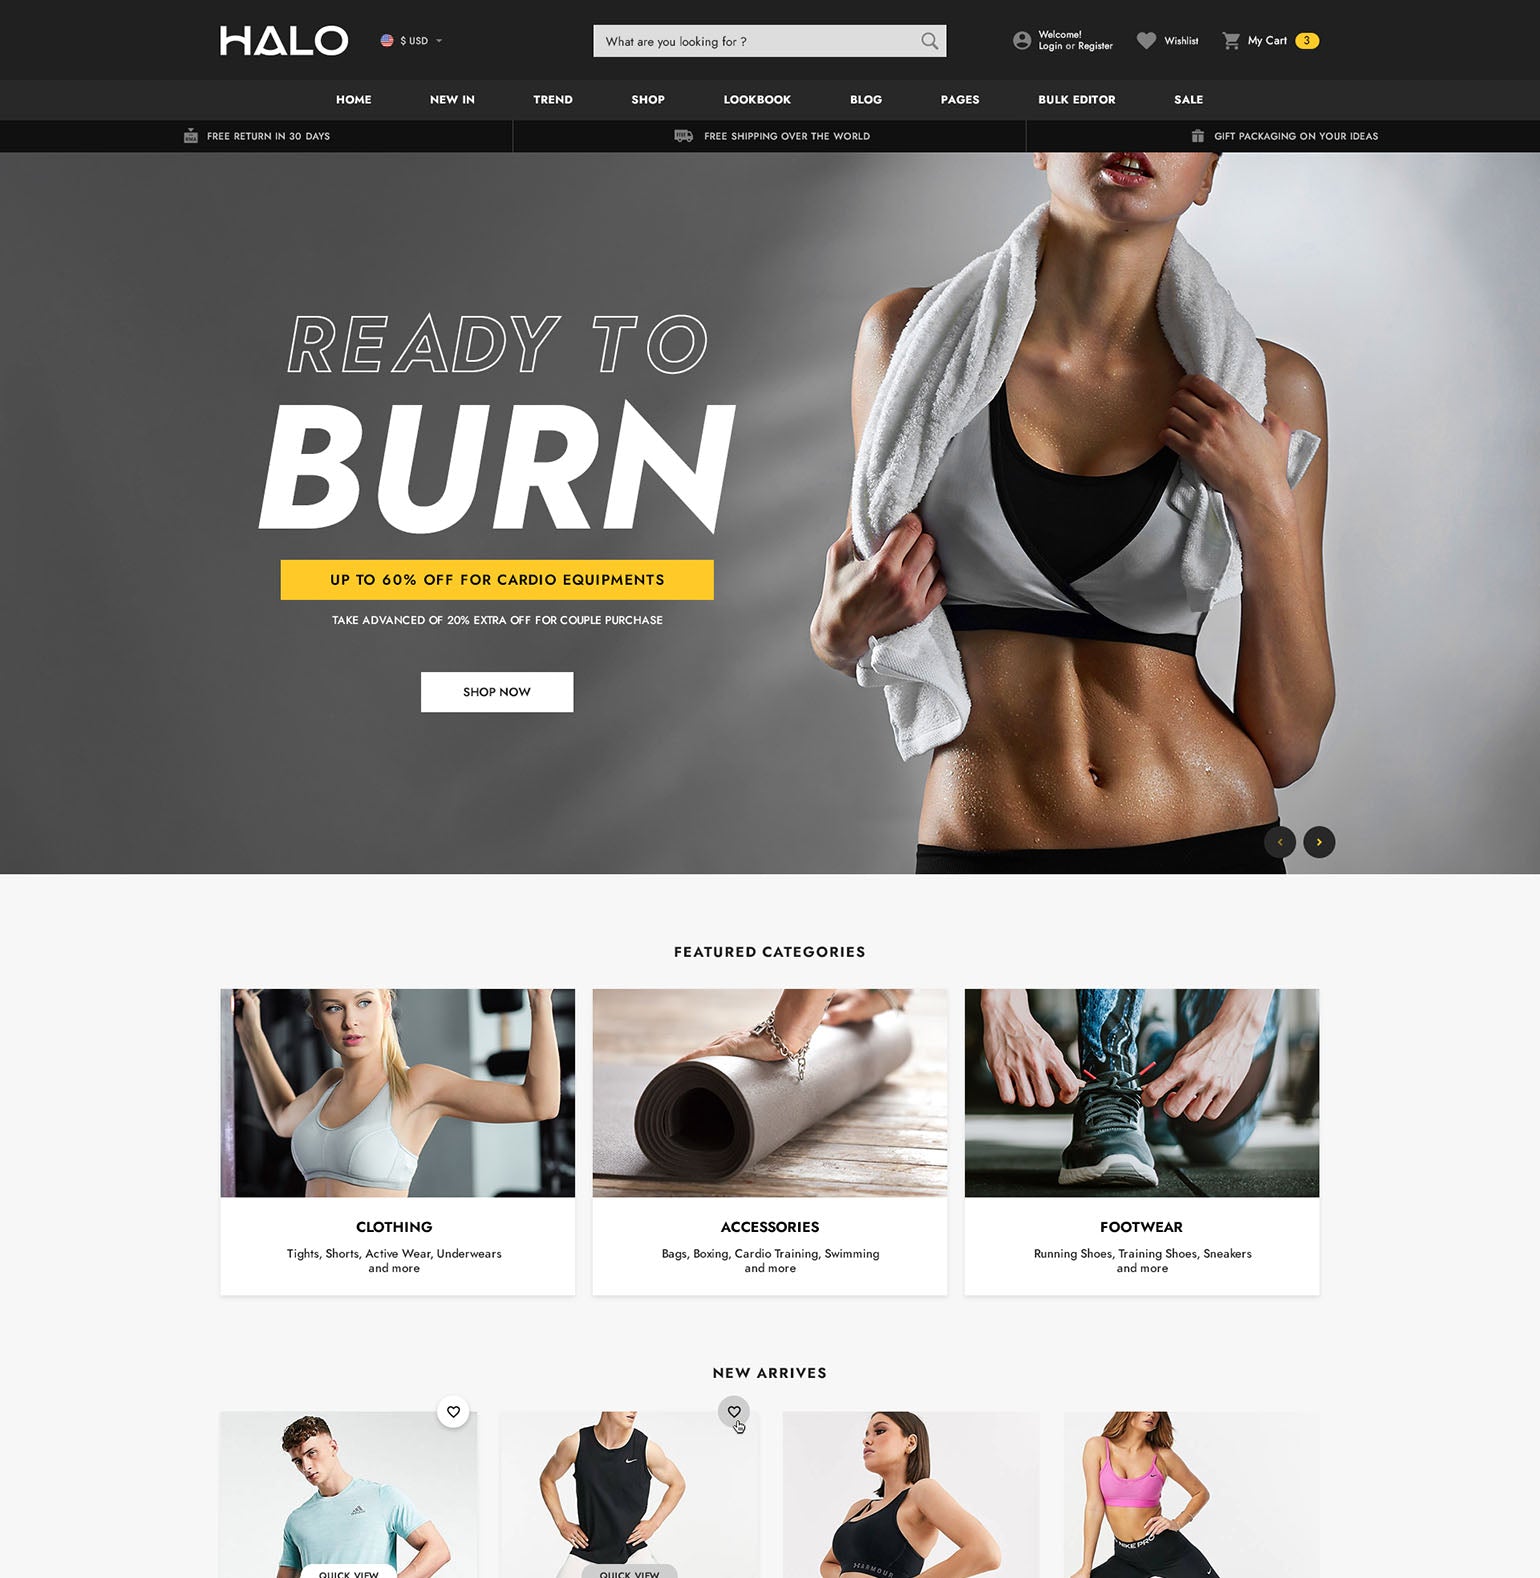 Halo Theme - Exercise Equipment Stores Ecommerce Website Template